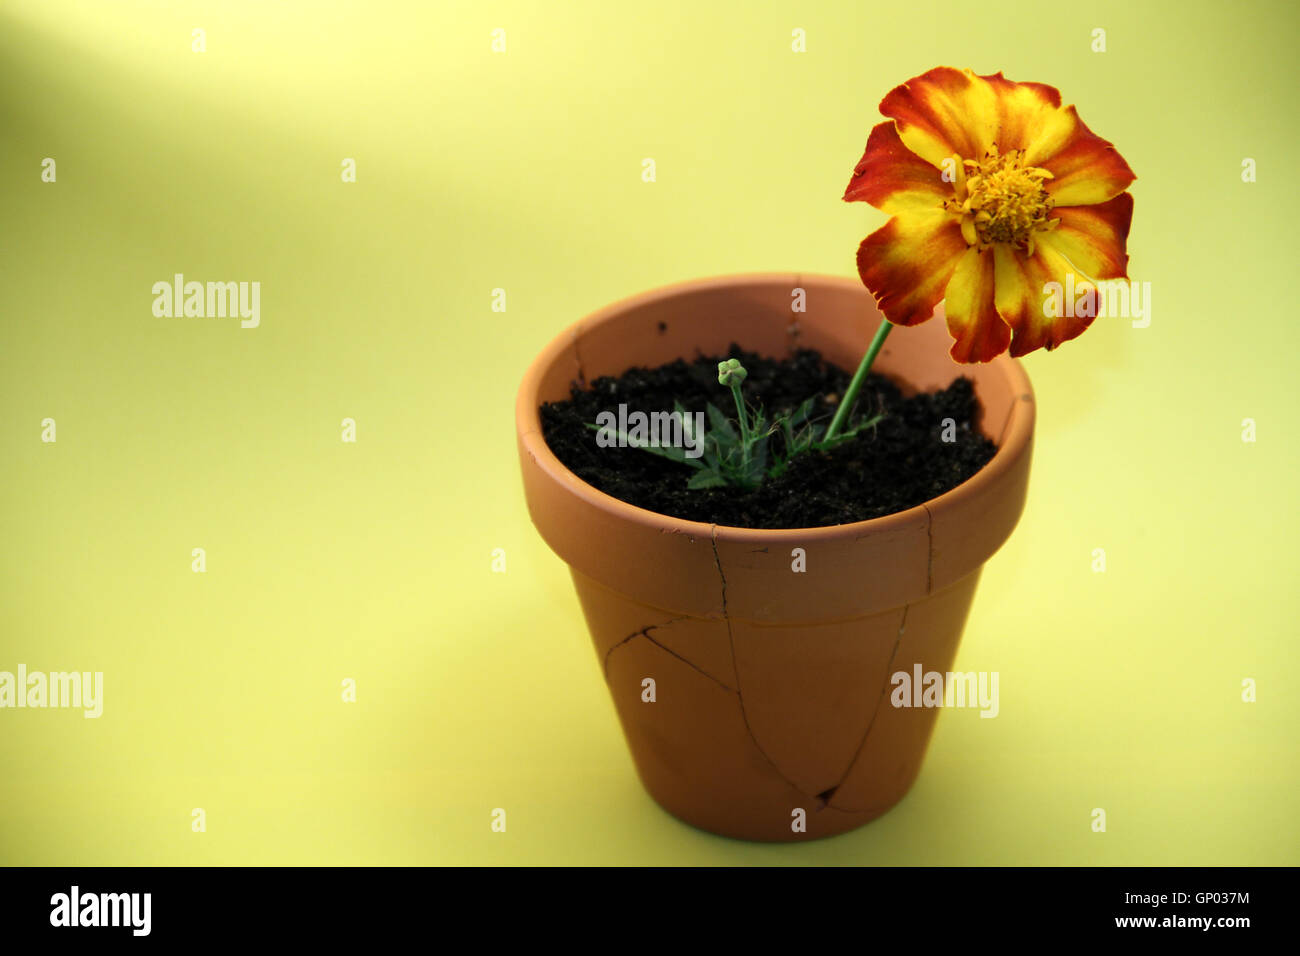 The flower is life growing through a broken pot which illustrates a traumatic state, resilience, recovery, rebirth. Stock Photo